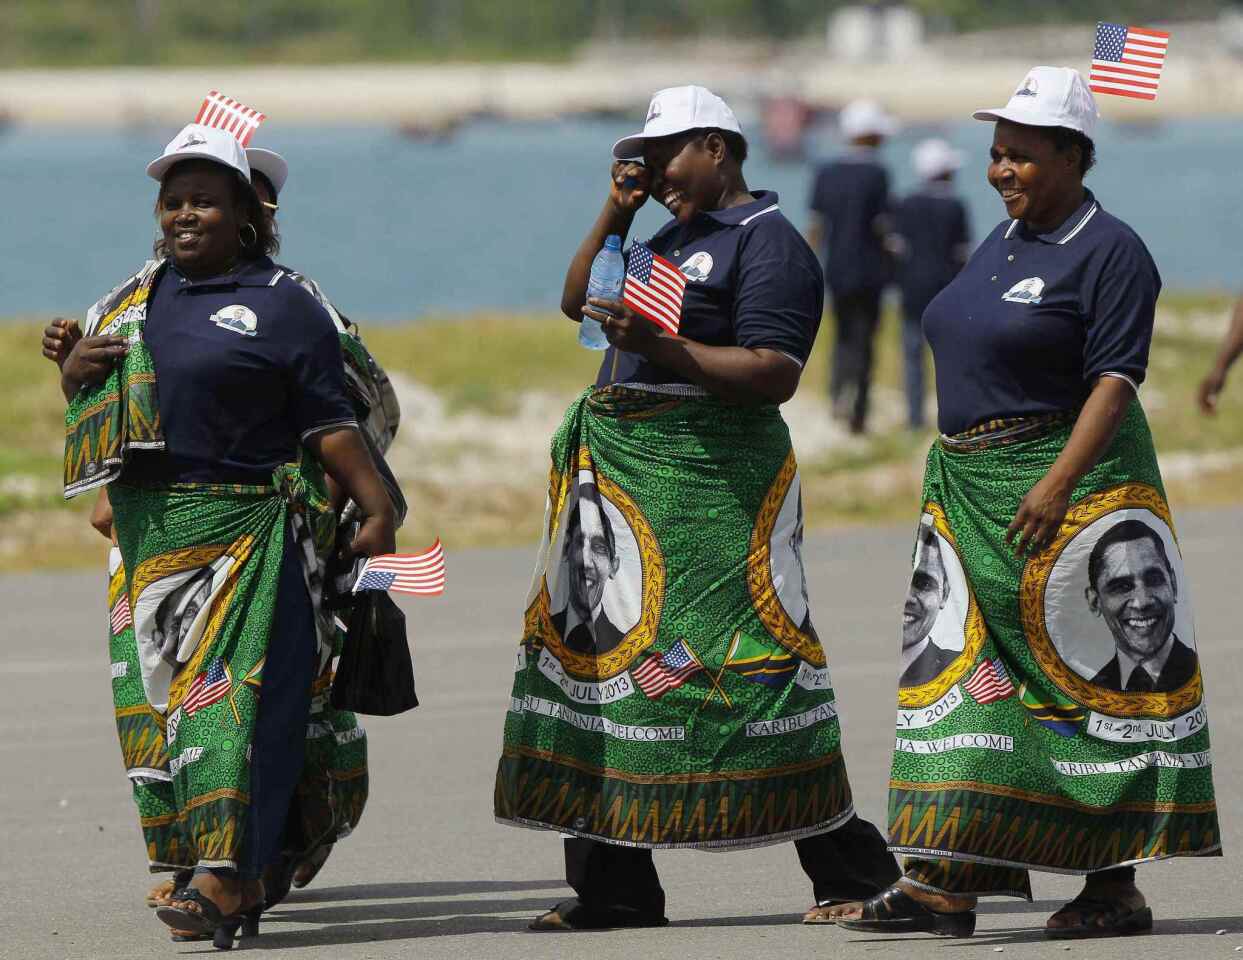 Tanzanian women wearing the local kitenge dress, bearing the image of U.S. President Obama, await the arrival of the President and the First lady in Dar Es Salaam